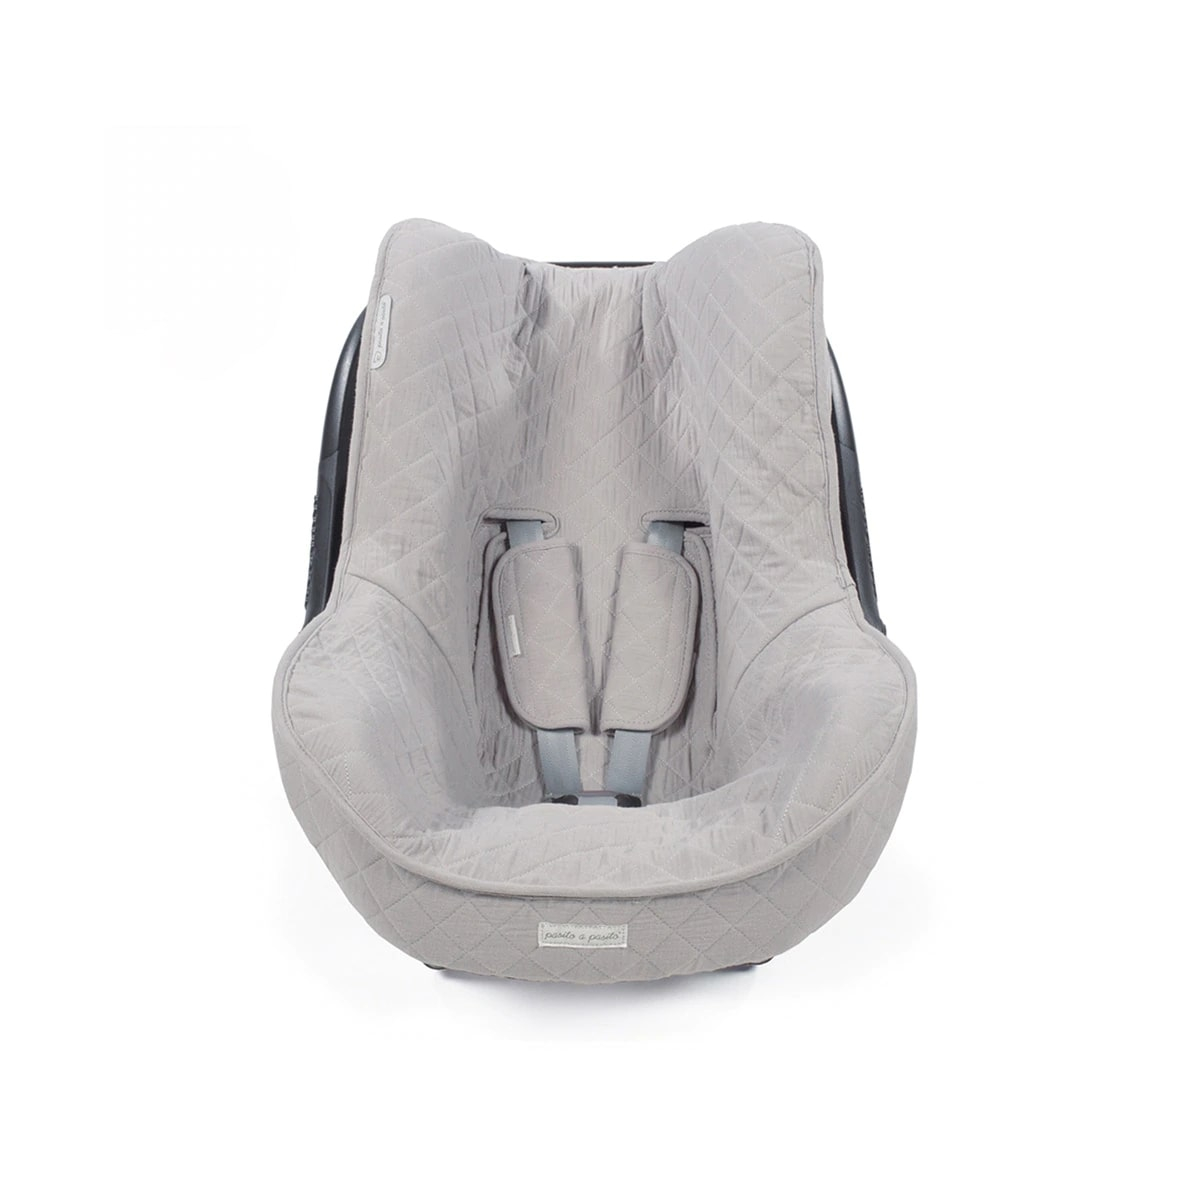 Grey stitched universal car seat cover